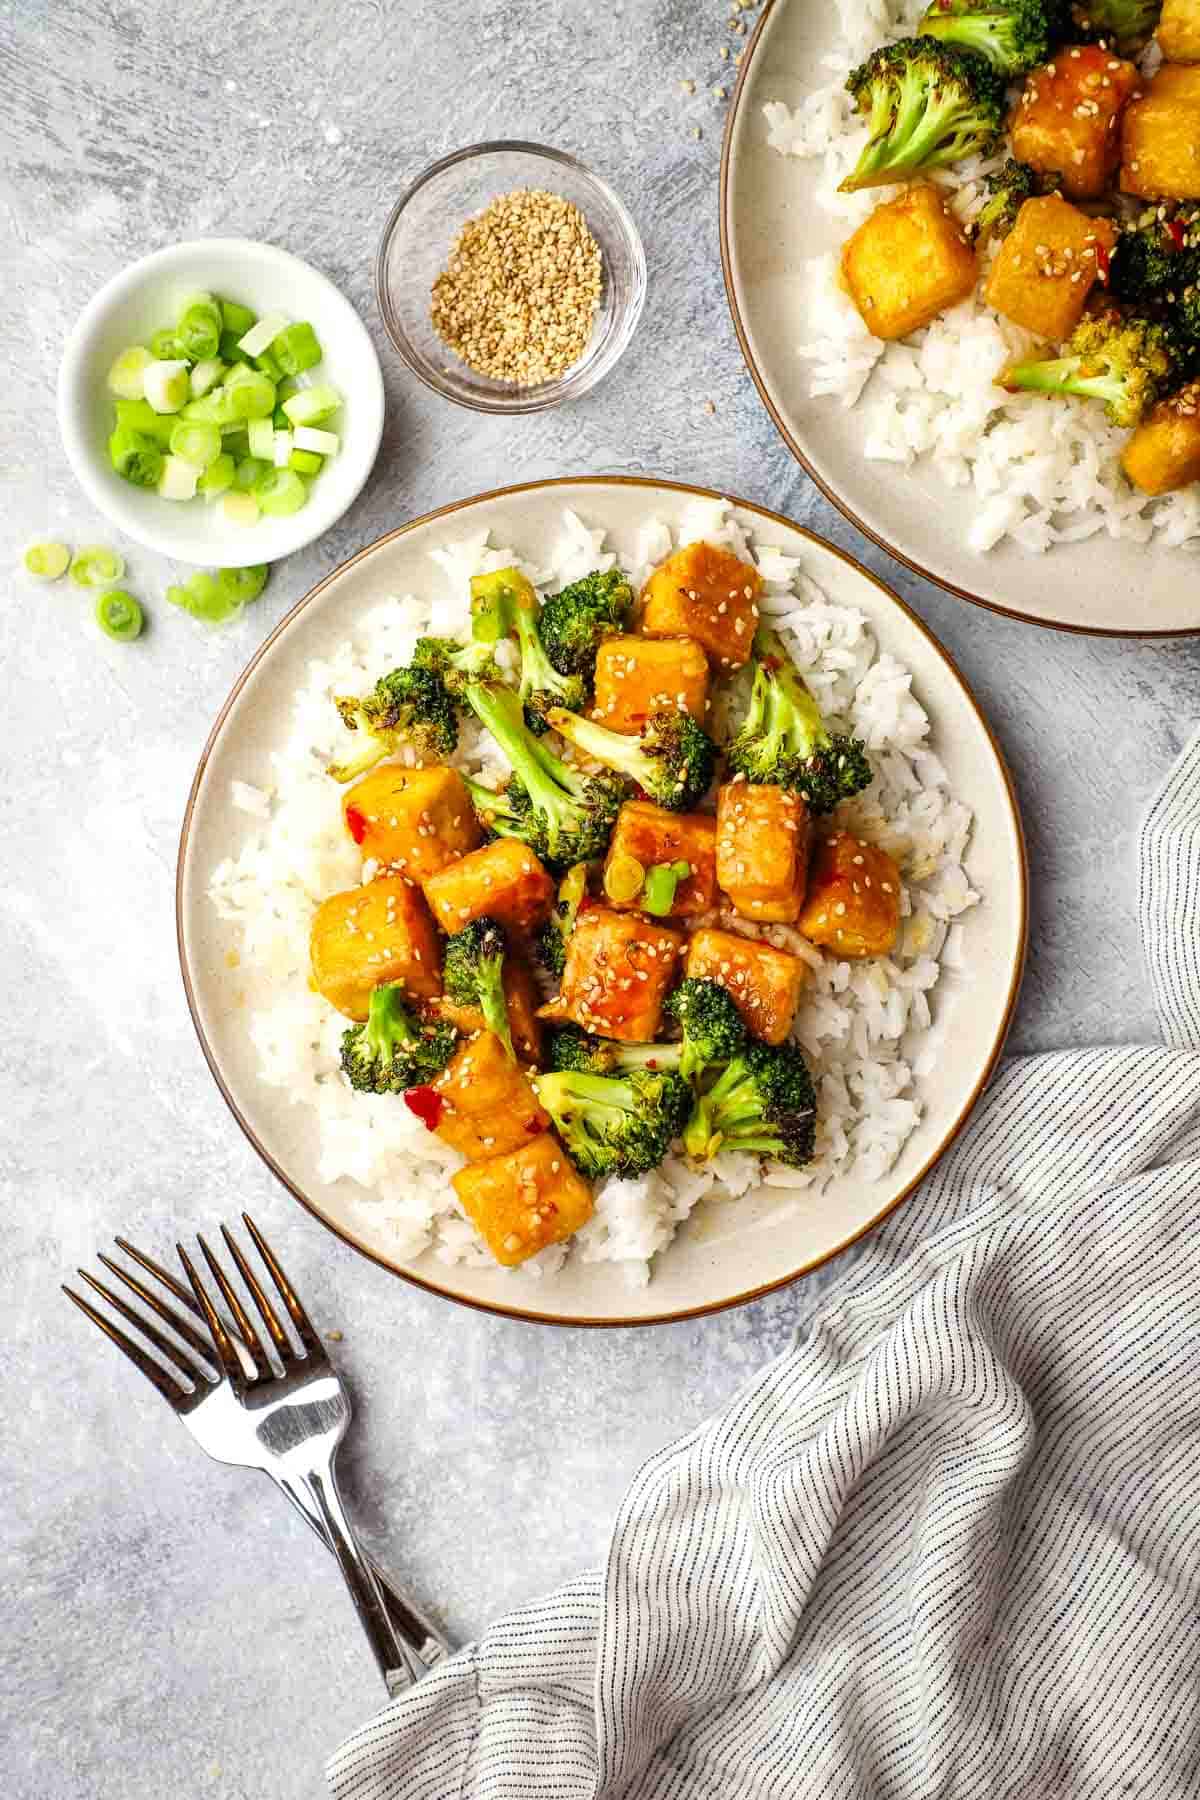 Overhead view of two plates of glazed tofu and broccoli on a bed of white rice.